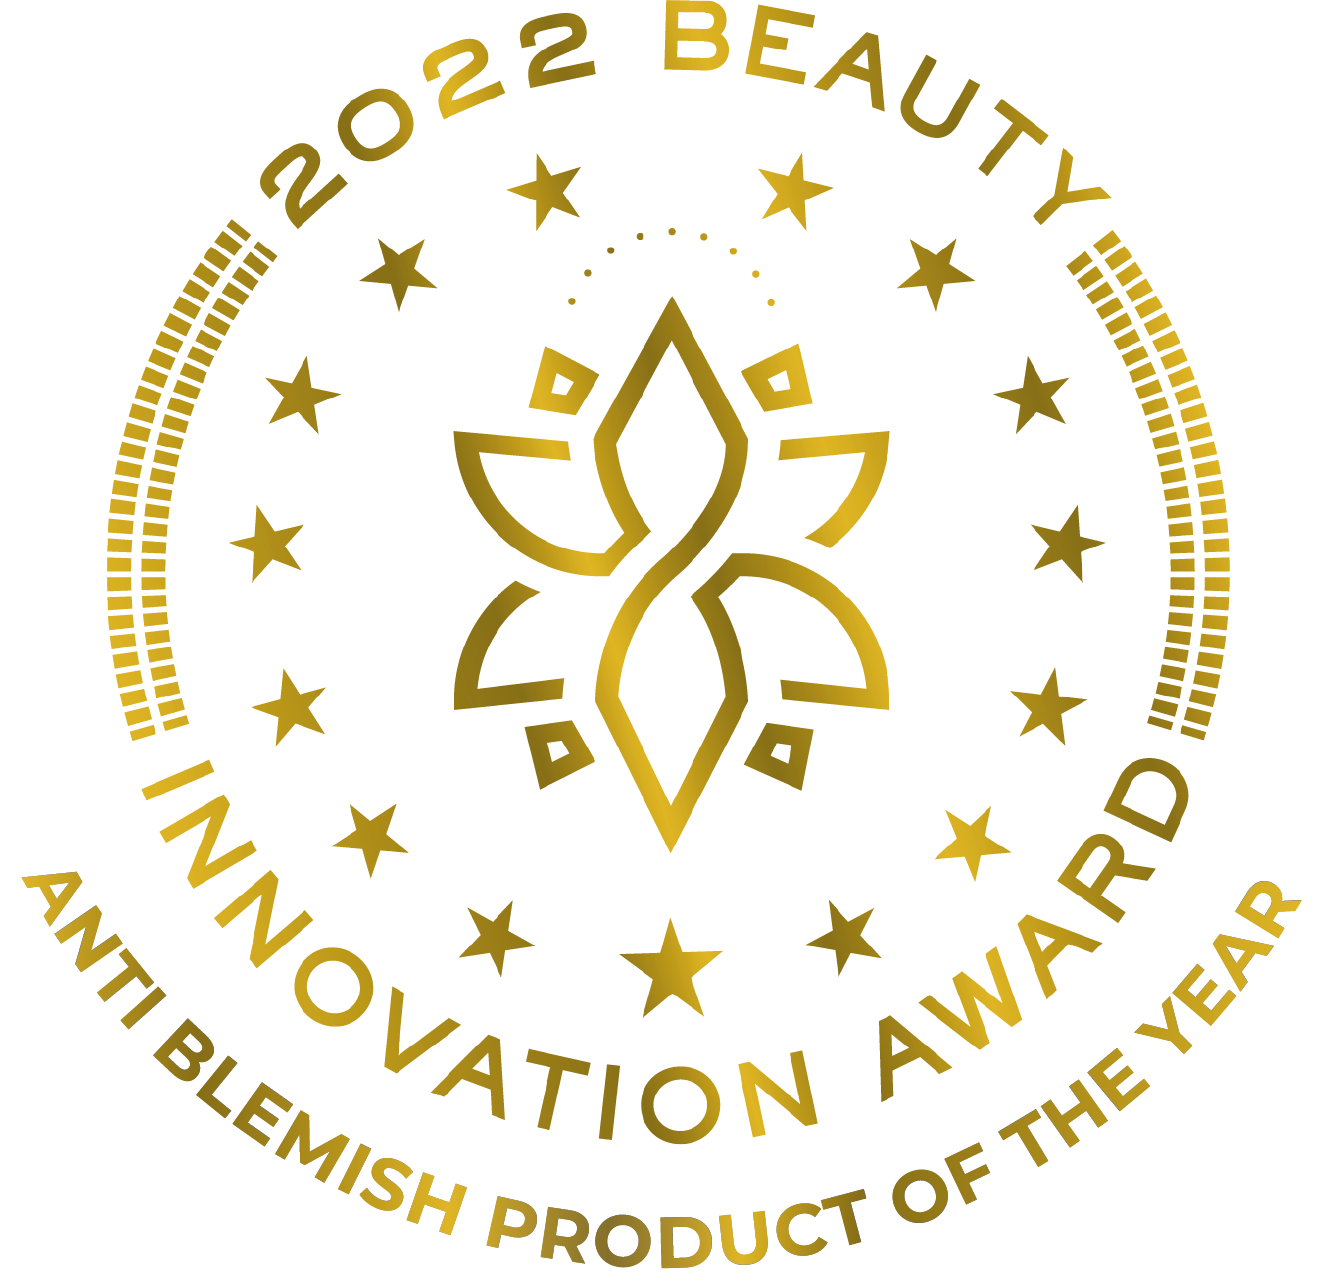 Beauty Innovation Awards Anti Blemish Product of the Year 2022